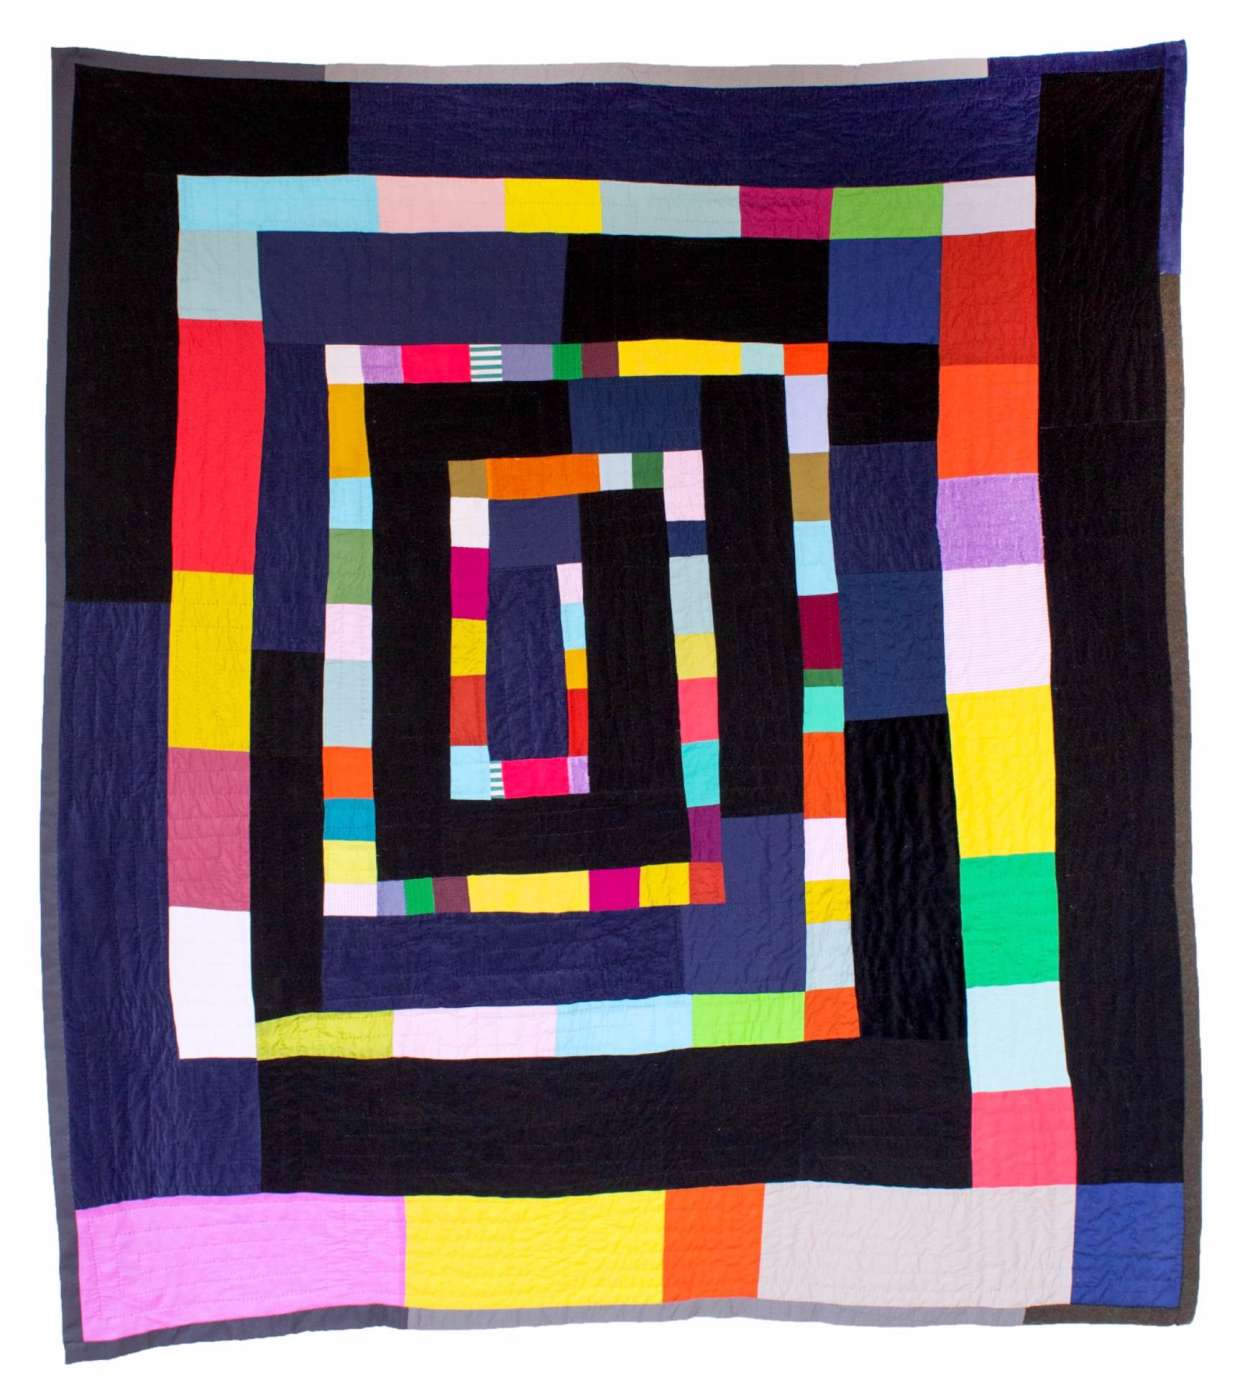 A colorful spiraled maze-like textile hanging by Martha Clippinger